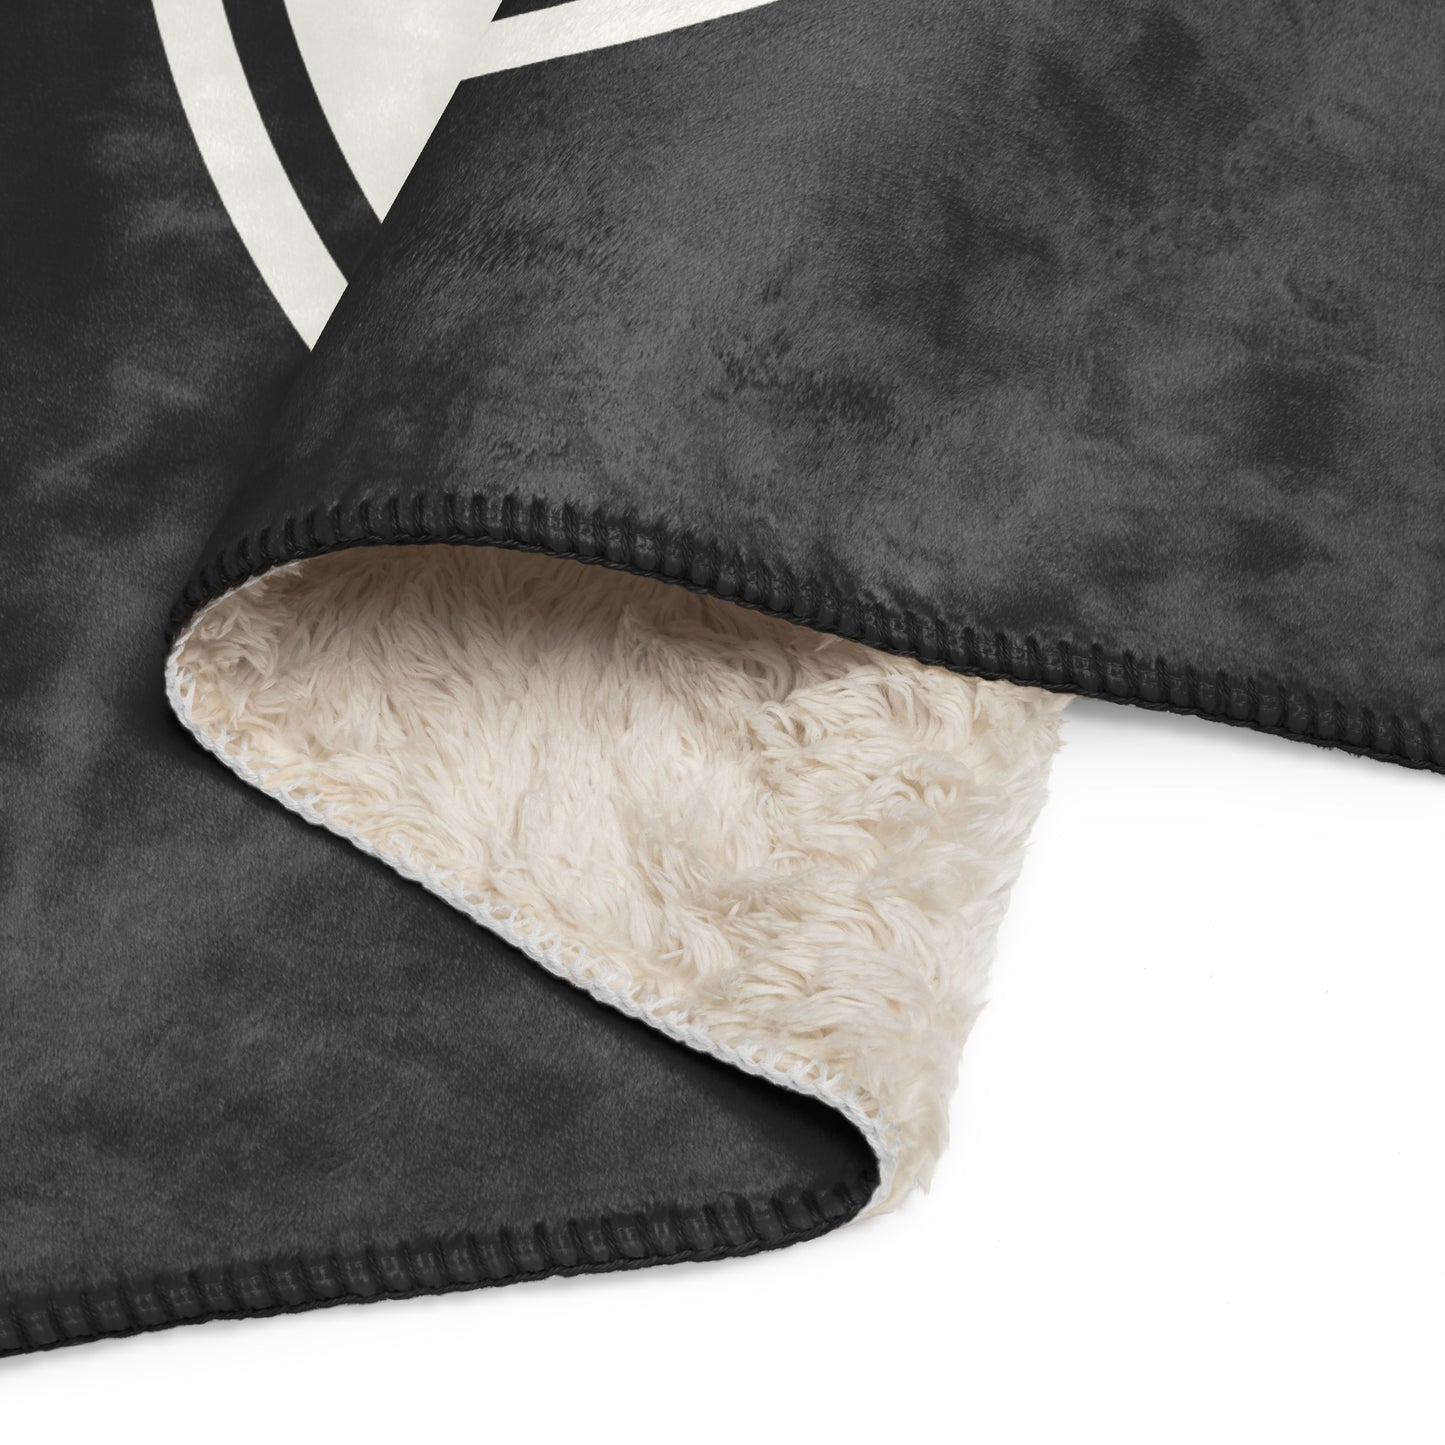 Unique Travel Gift Sherpa Blanket - White Oval • HKG Hong Kong • YHM Designs - Image 08